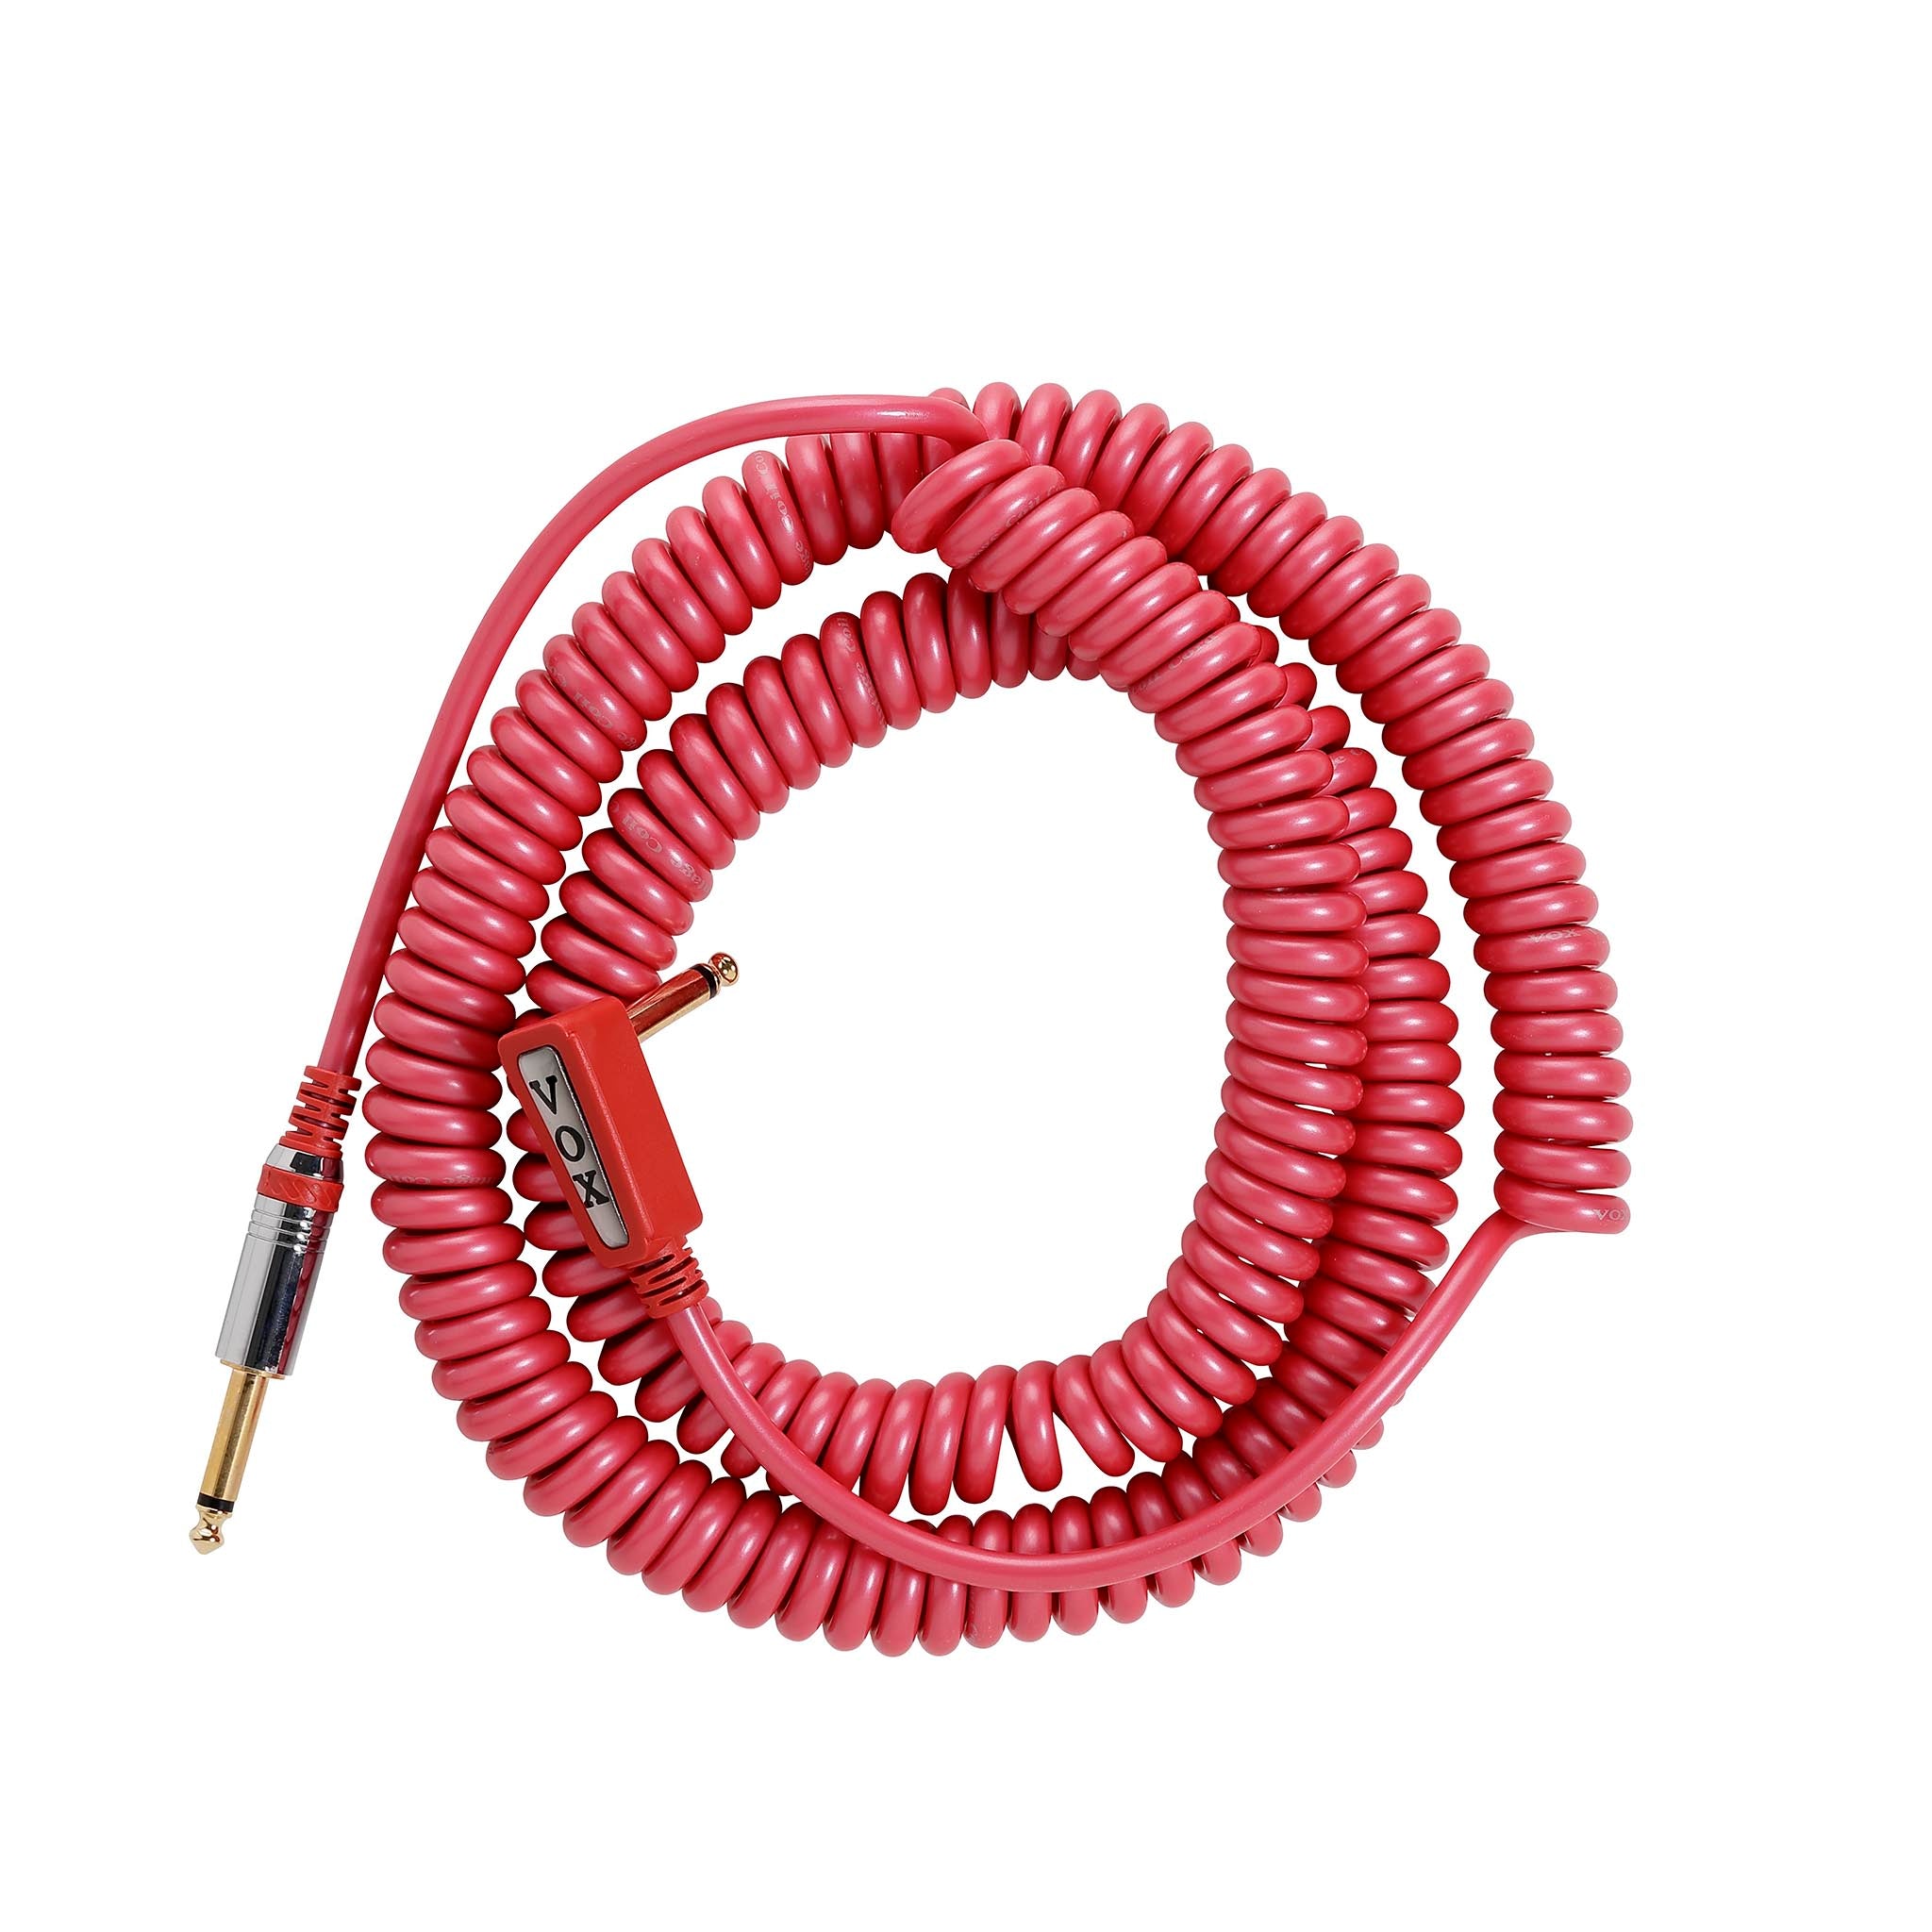 Vox Vintage Coiled Cable 3